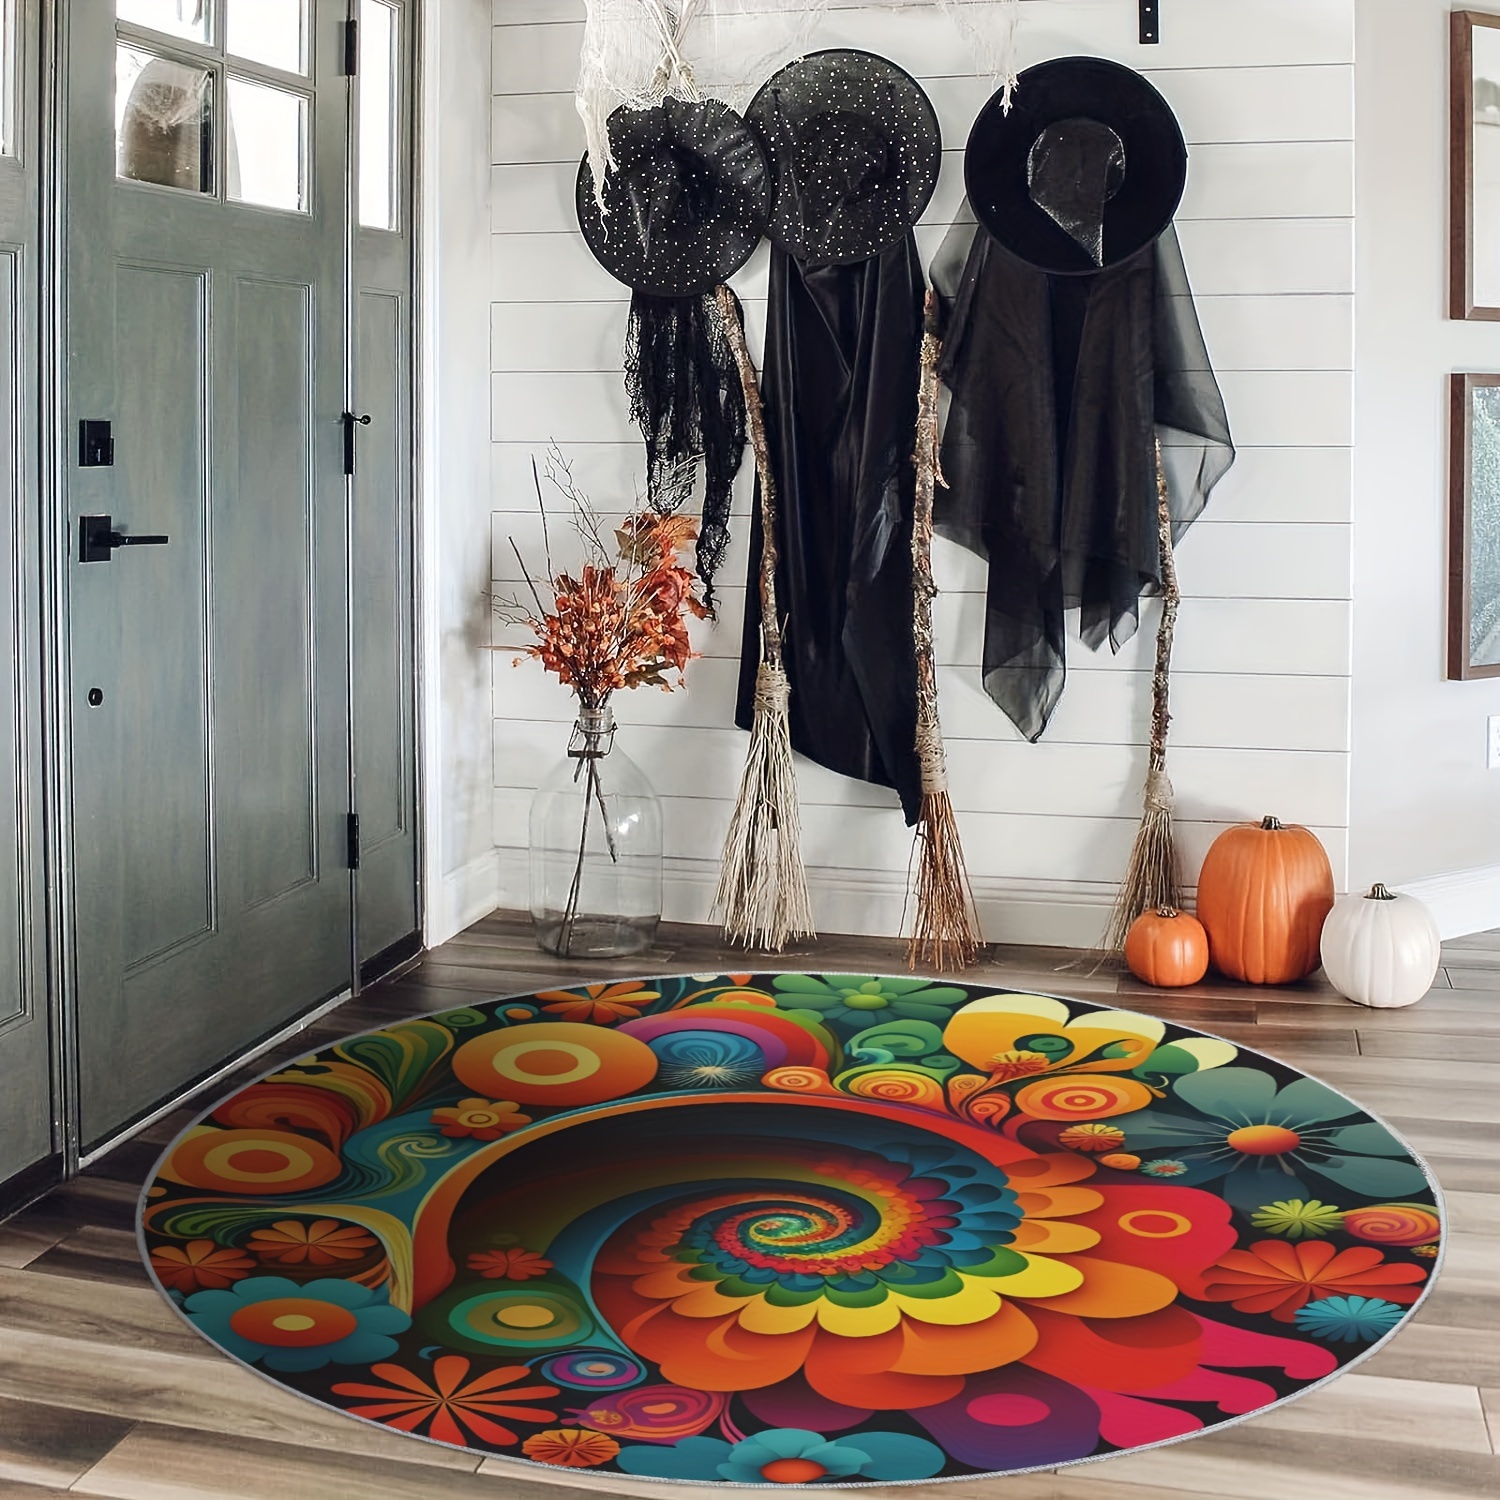 Colorful area rugs for your home